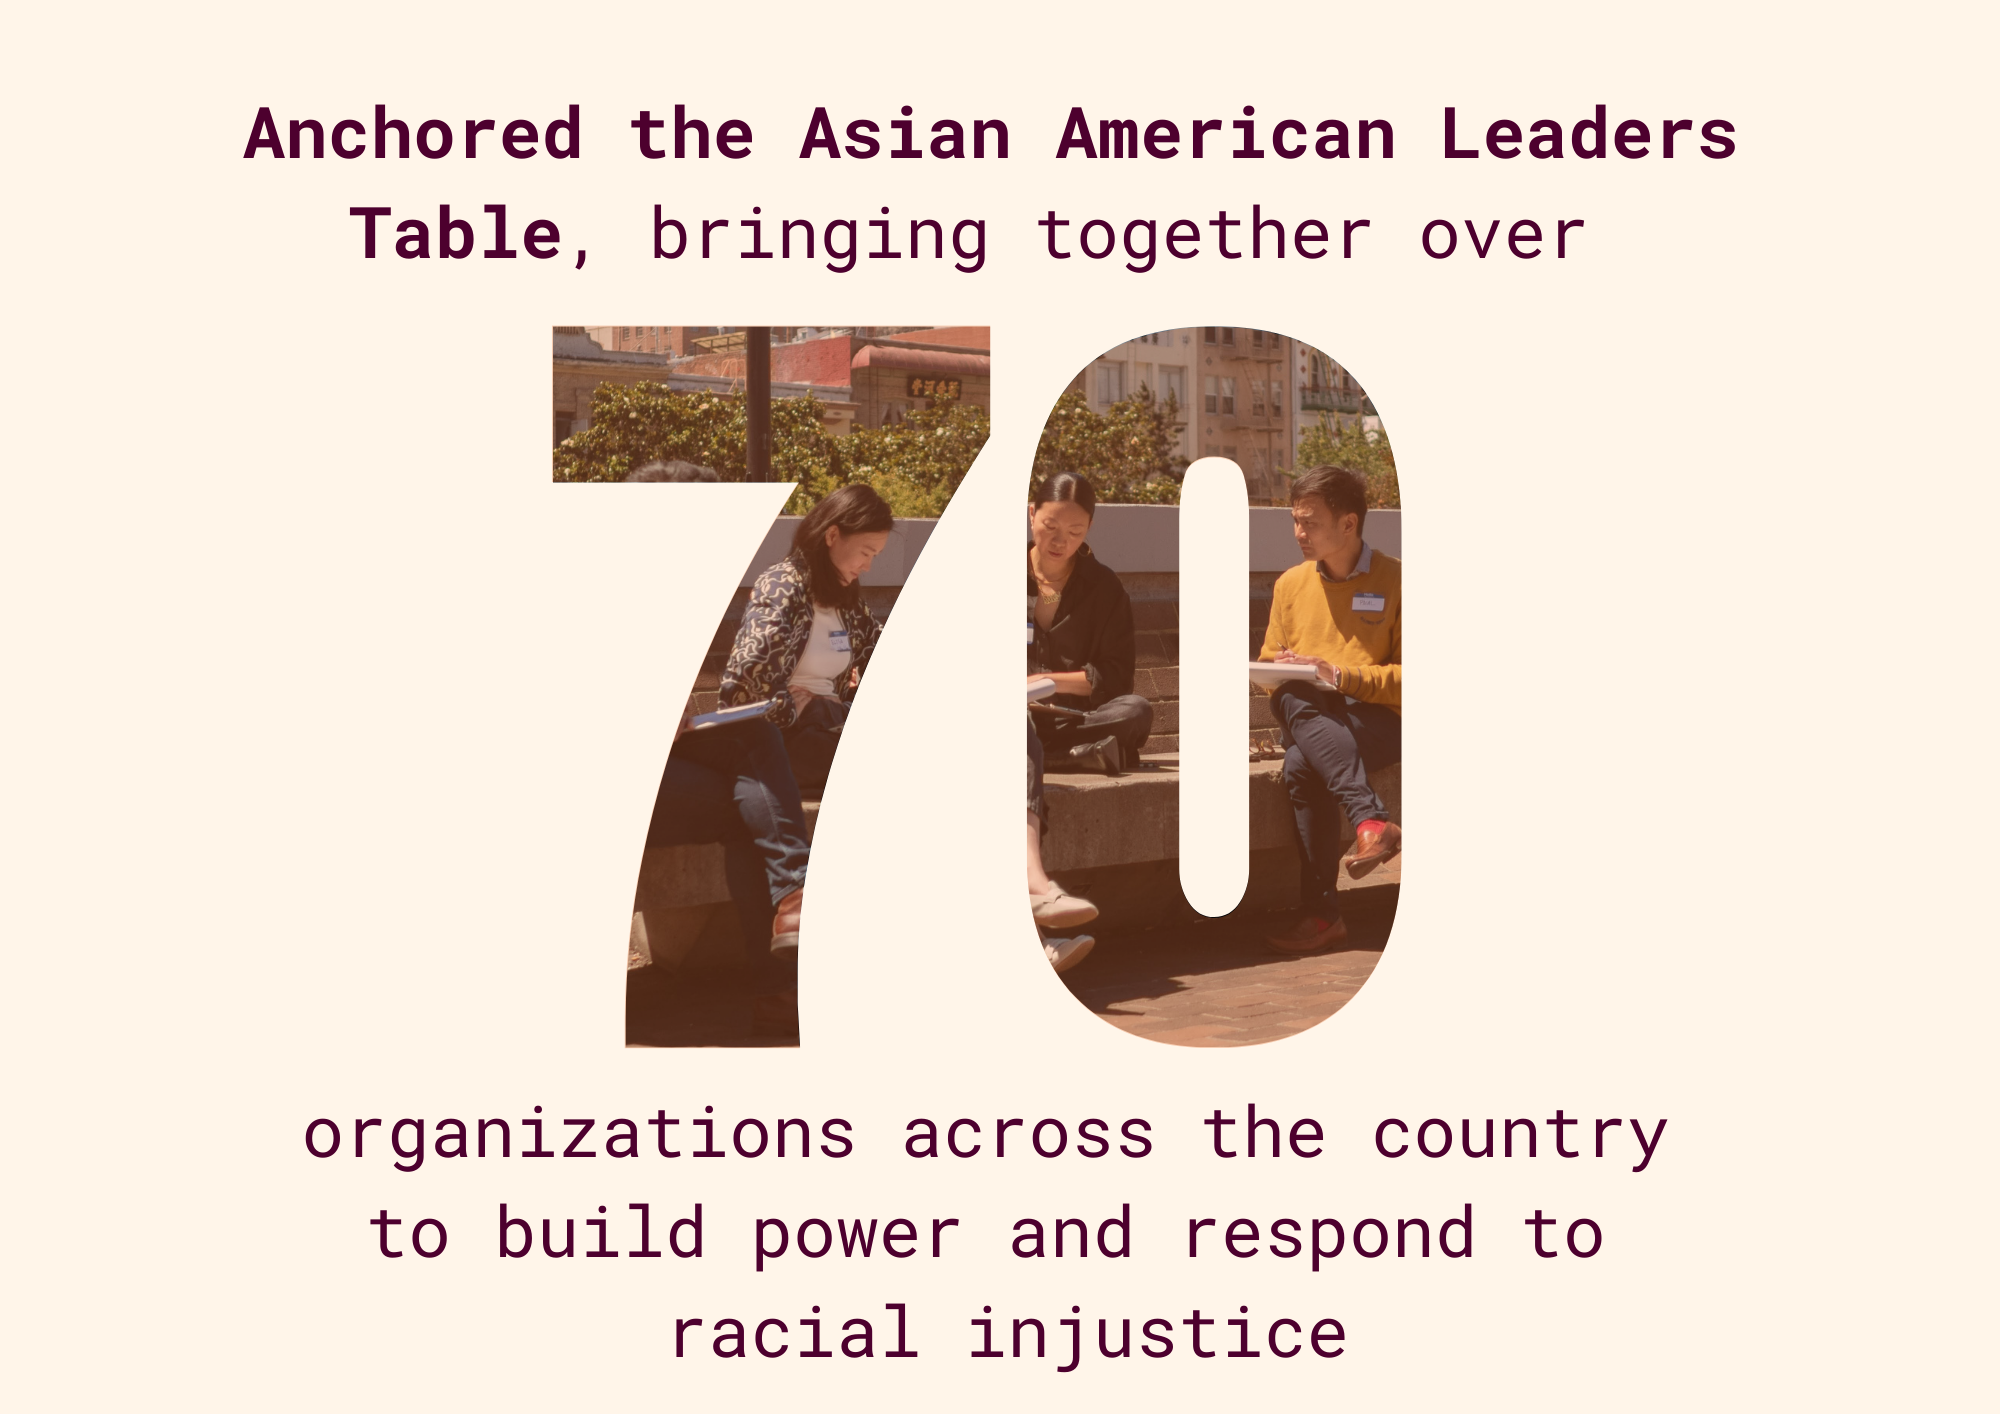 ALC anchored the Asian American Leaders Table, bringing together over 70 organizations across the country to build power and respond to racial injustice.